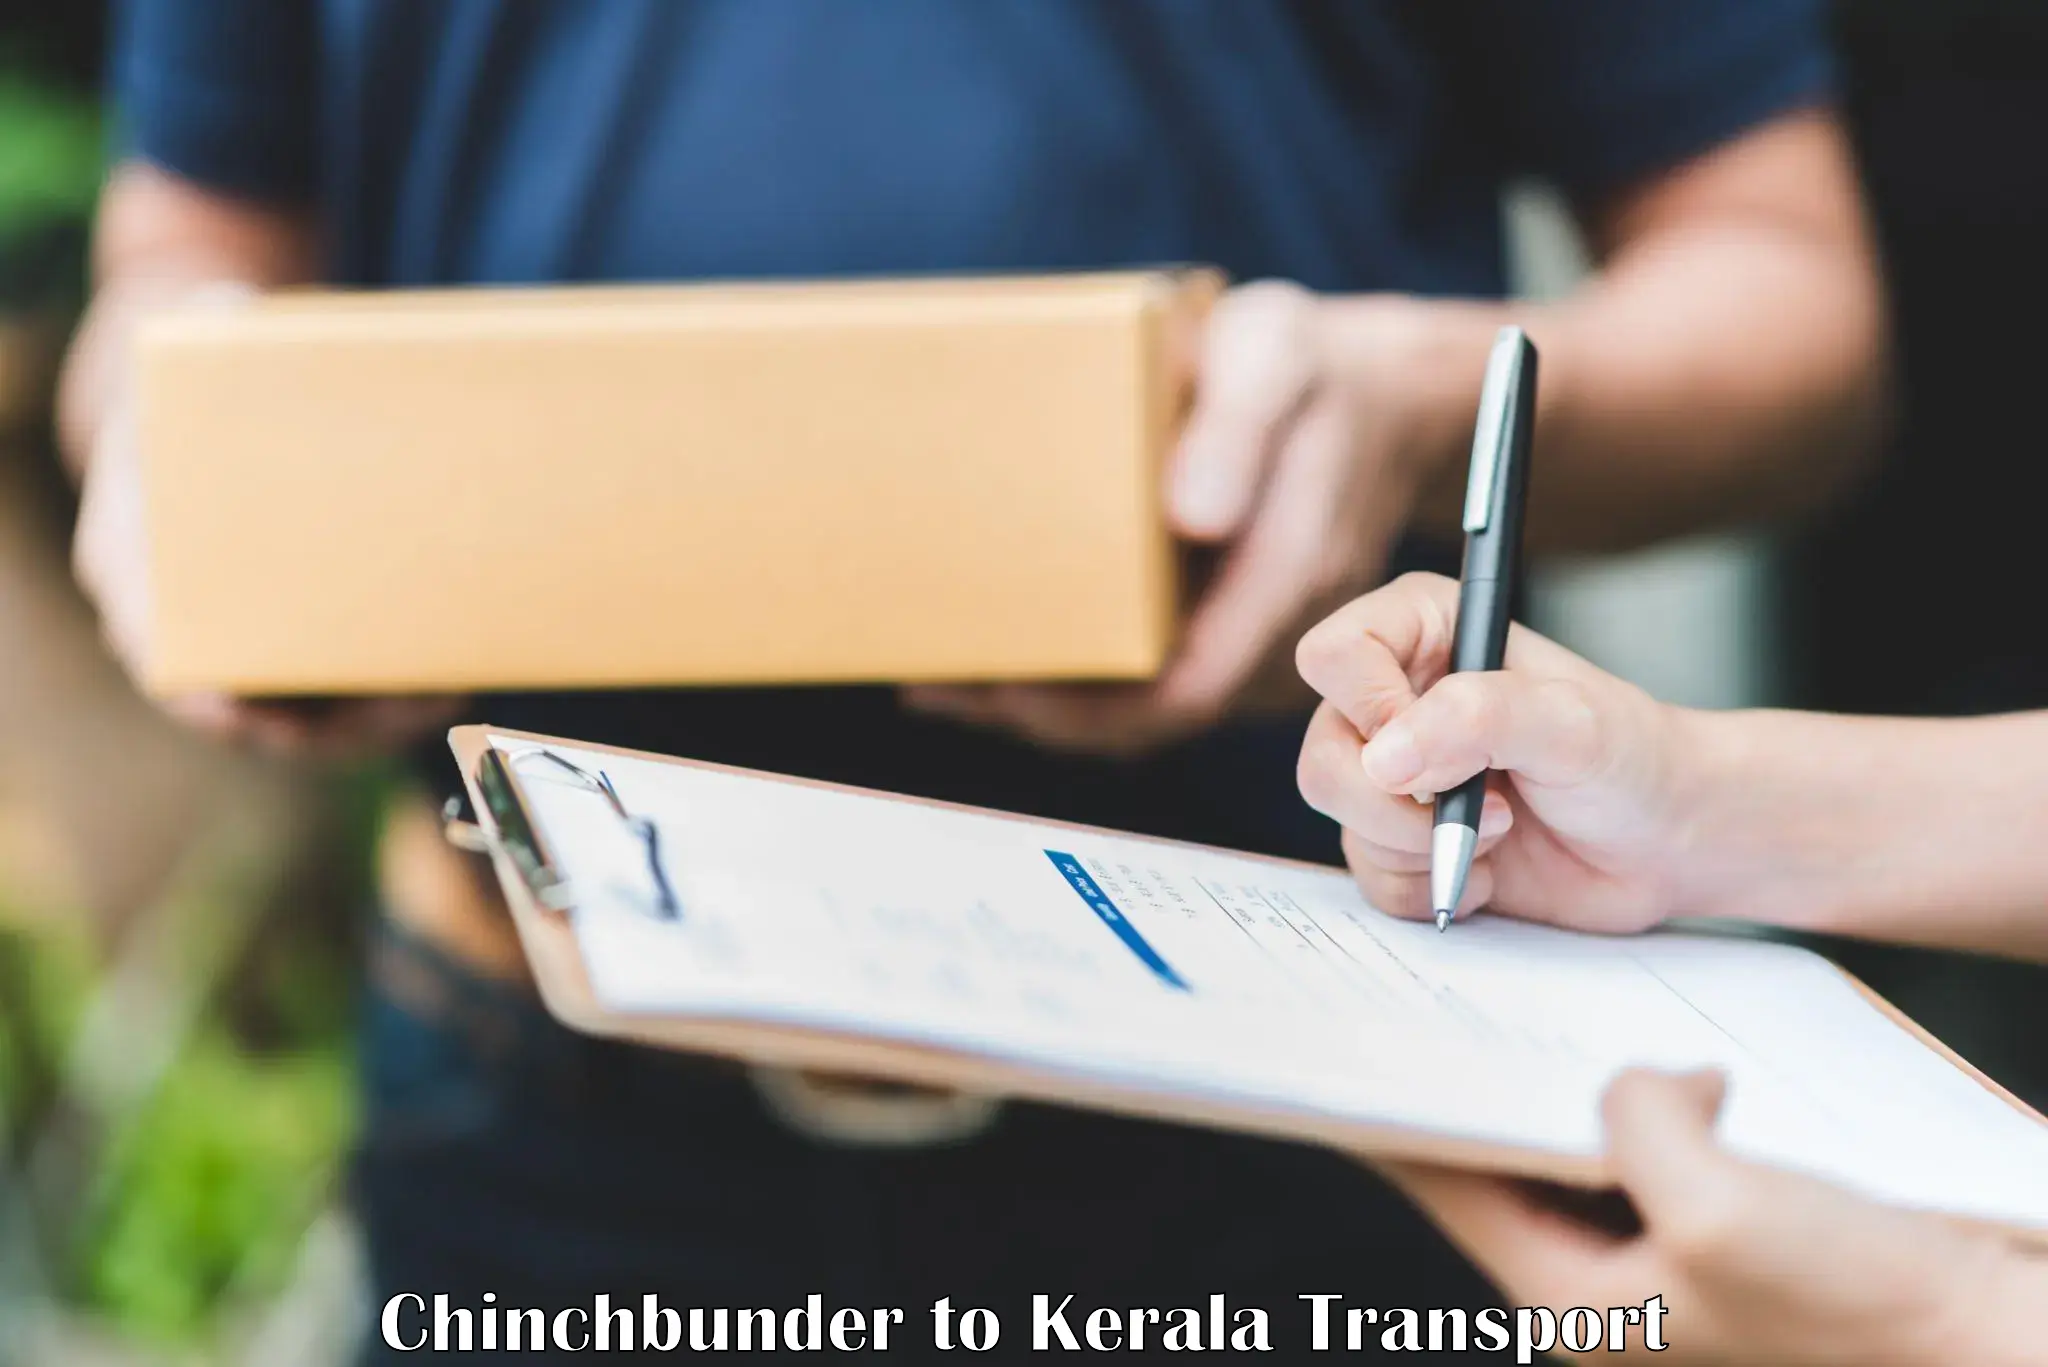 Container transportation services Chinchbunder to Kerala